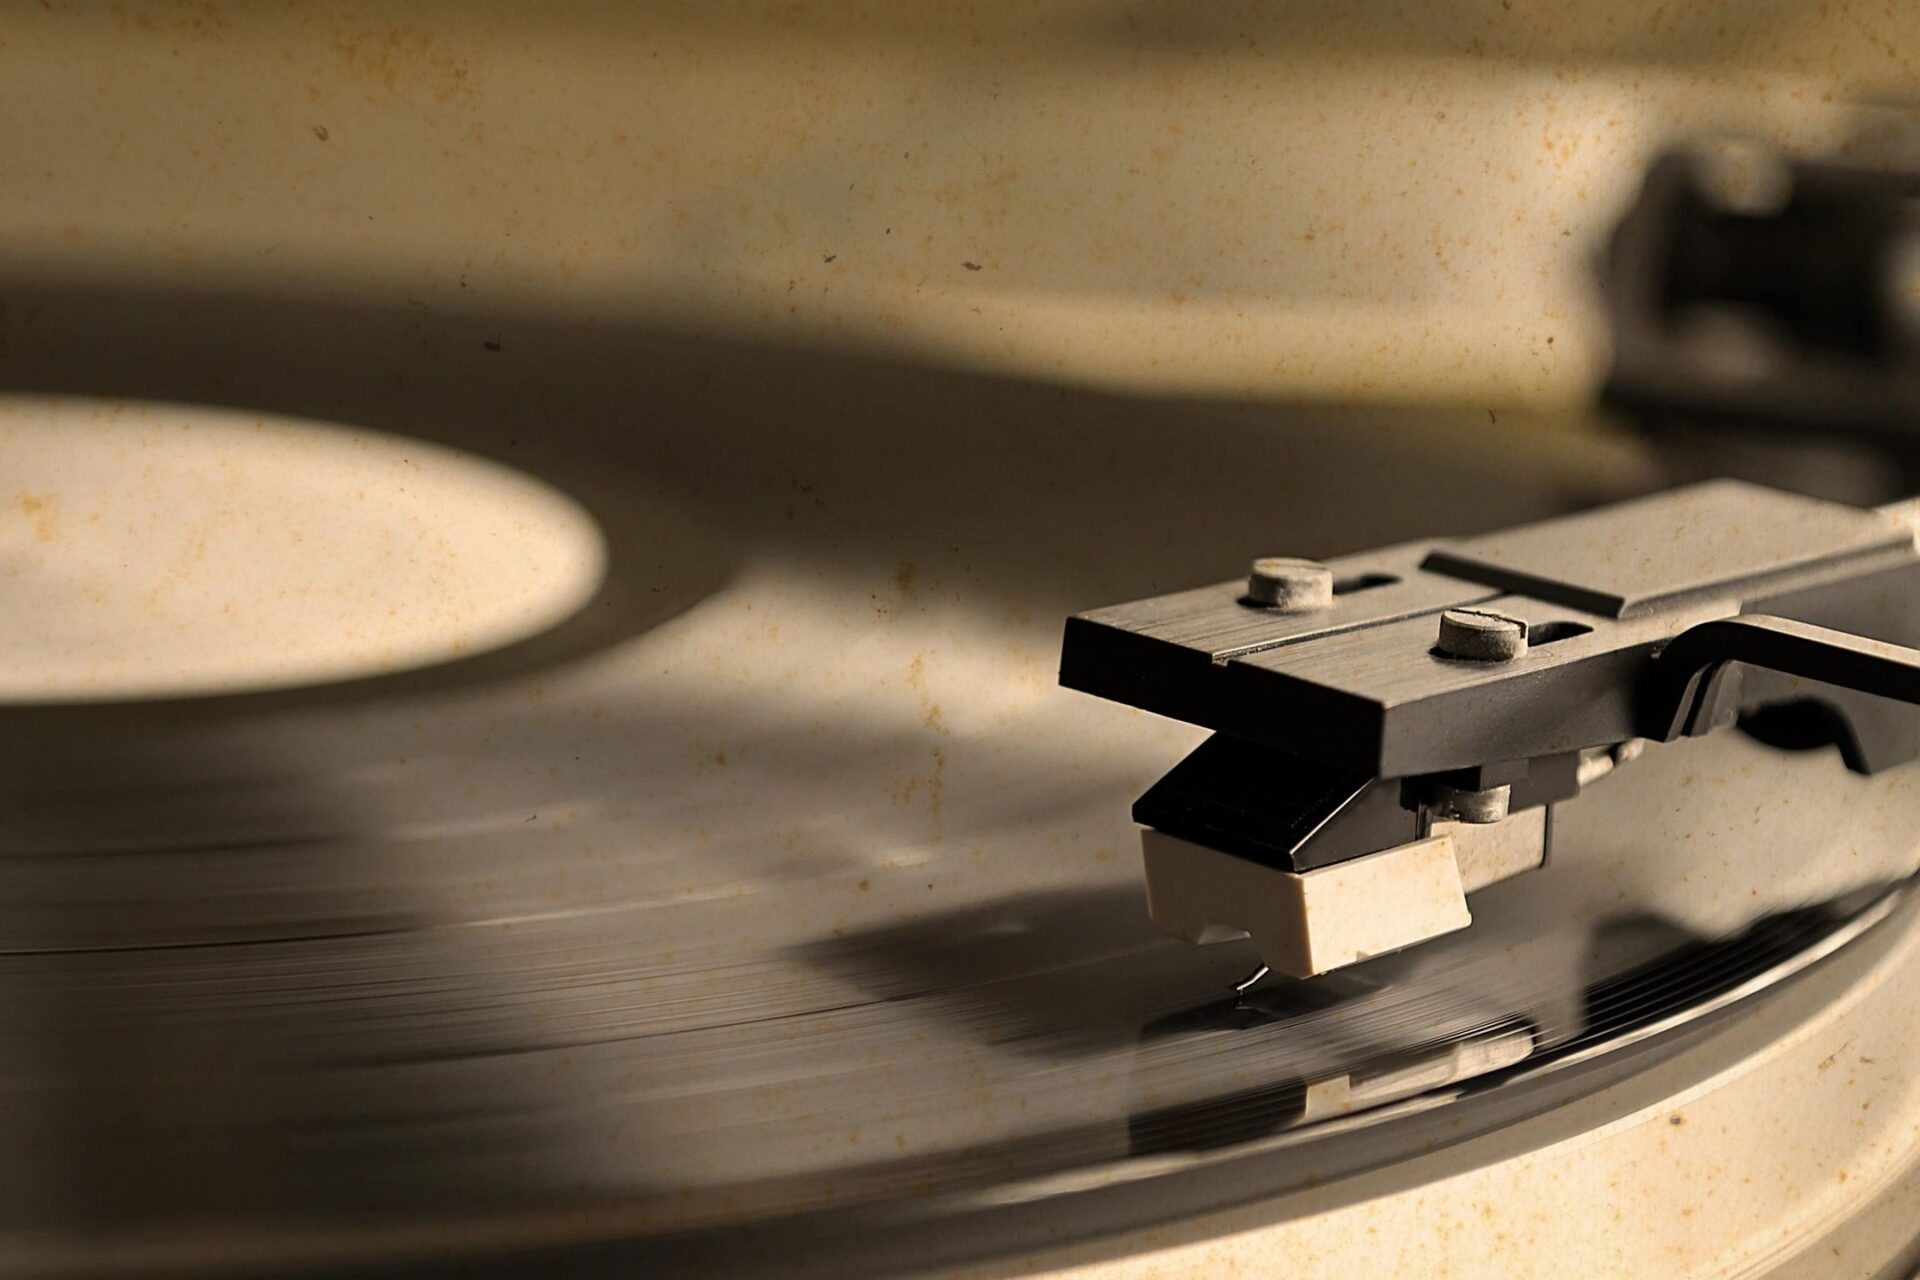 A record player playing an old fashioned record.